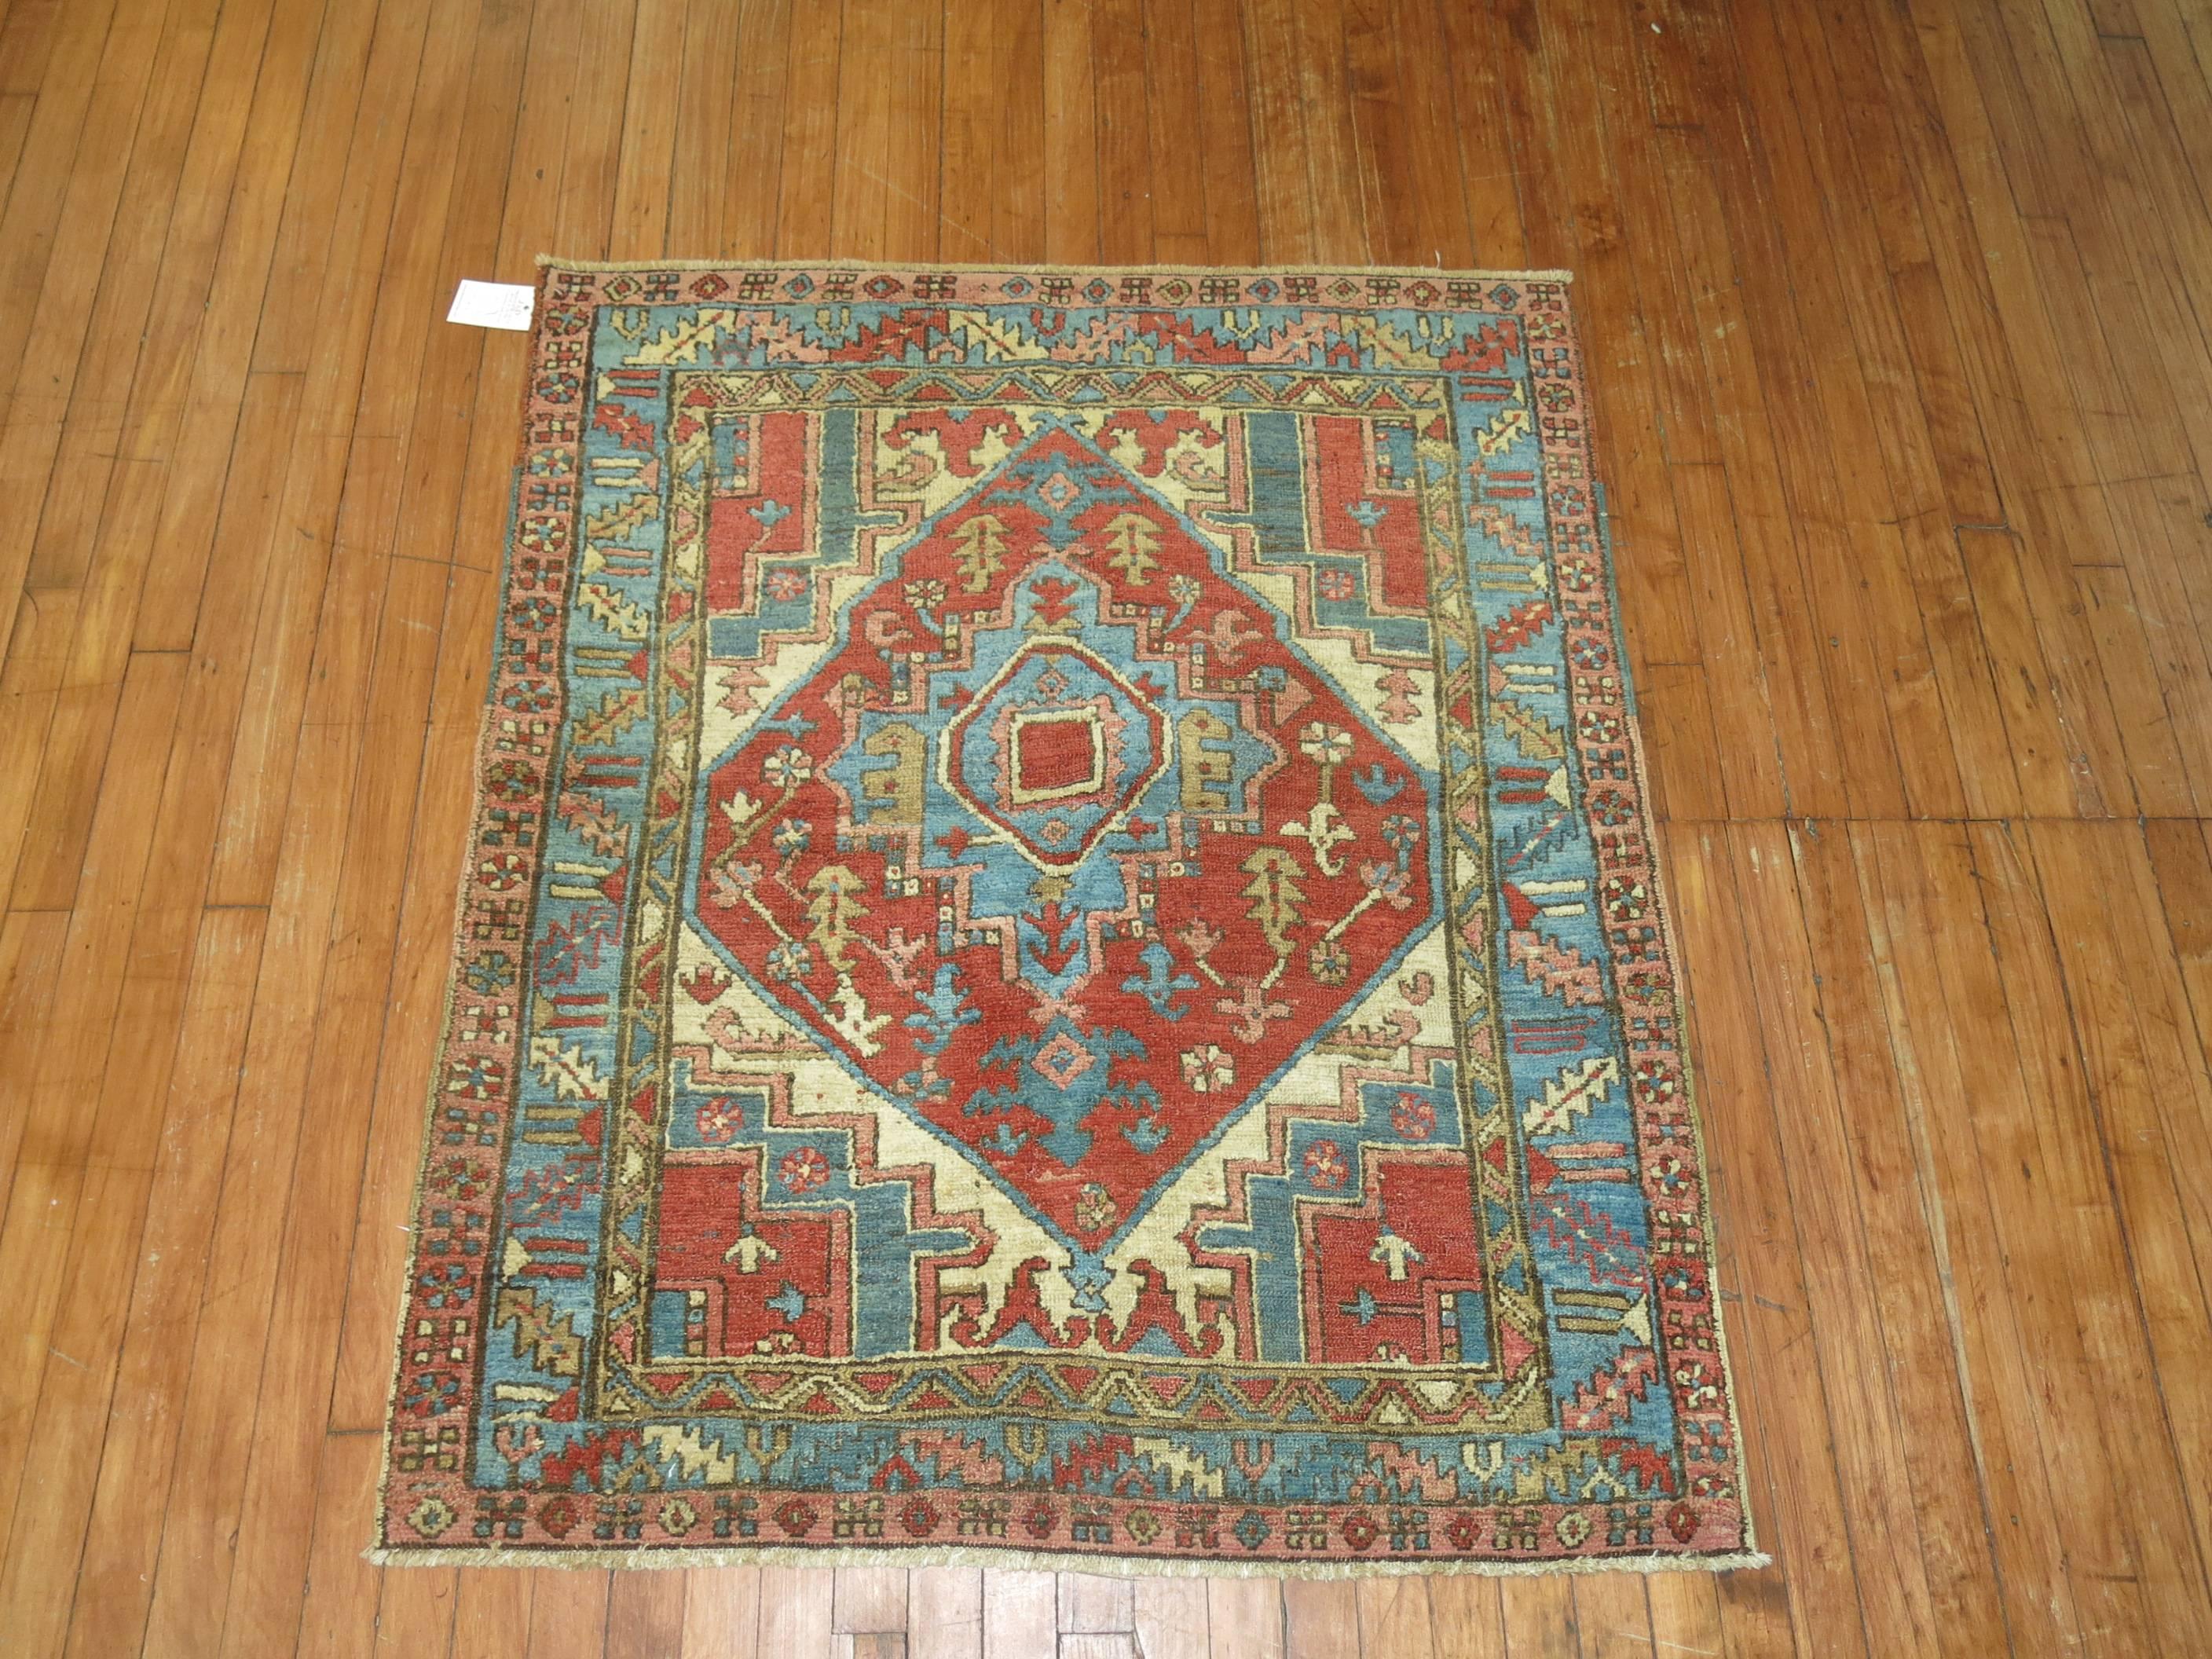 Rare Size Persian Square Heriz Rug.

Heriz carpets are beloved for their versatility and colors. Their geometry complements modern furnishings and their warm colors and artistic depth enhances antiques of all kinds. Their richness of color and